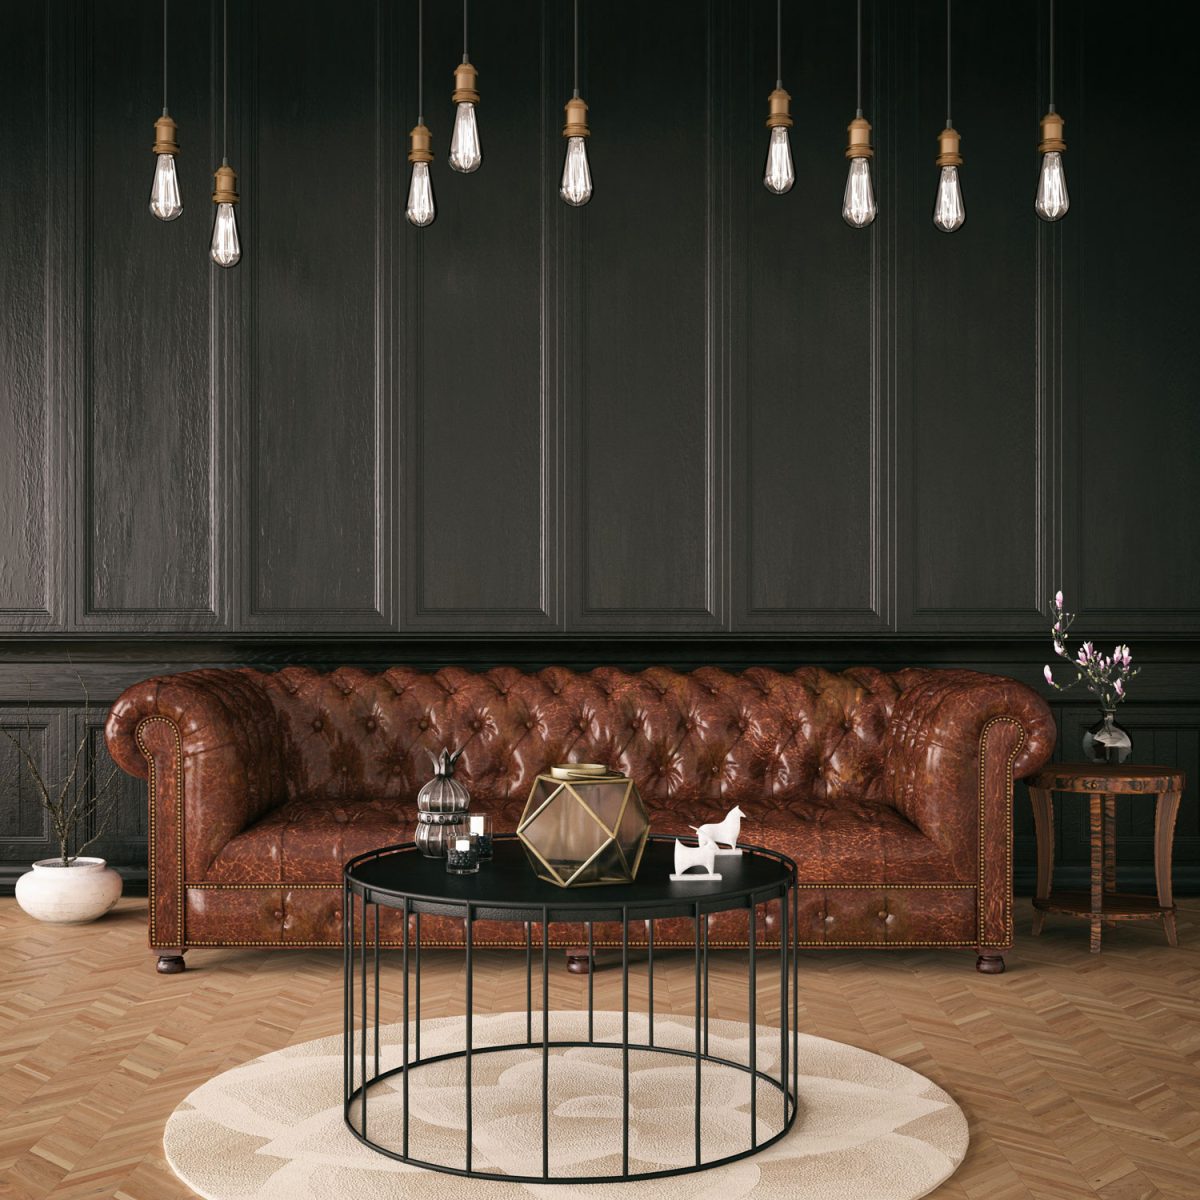 Long brown Chesterfield sofa with dangling lamps and an industrial coffee table up front